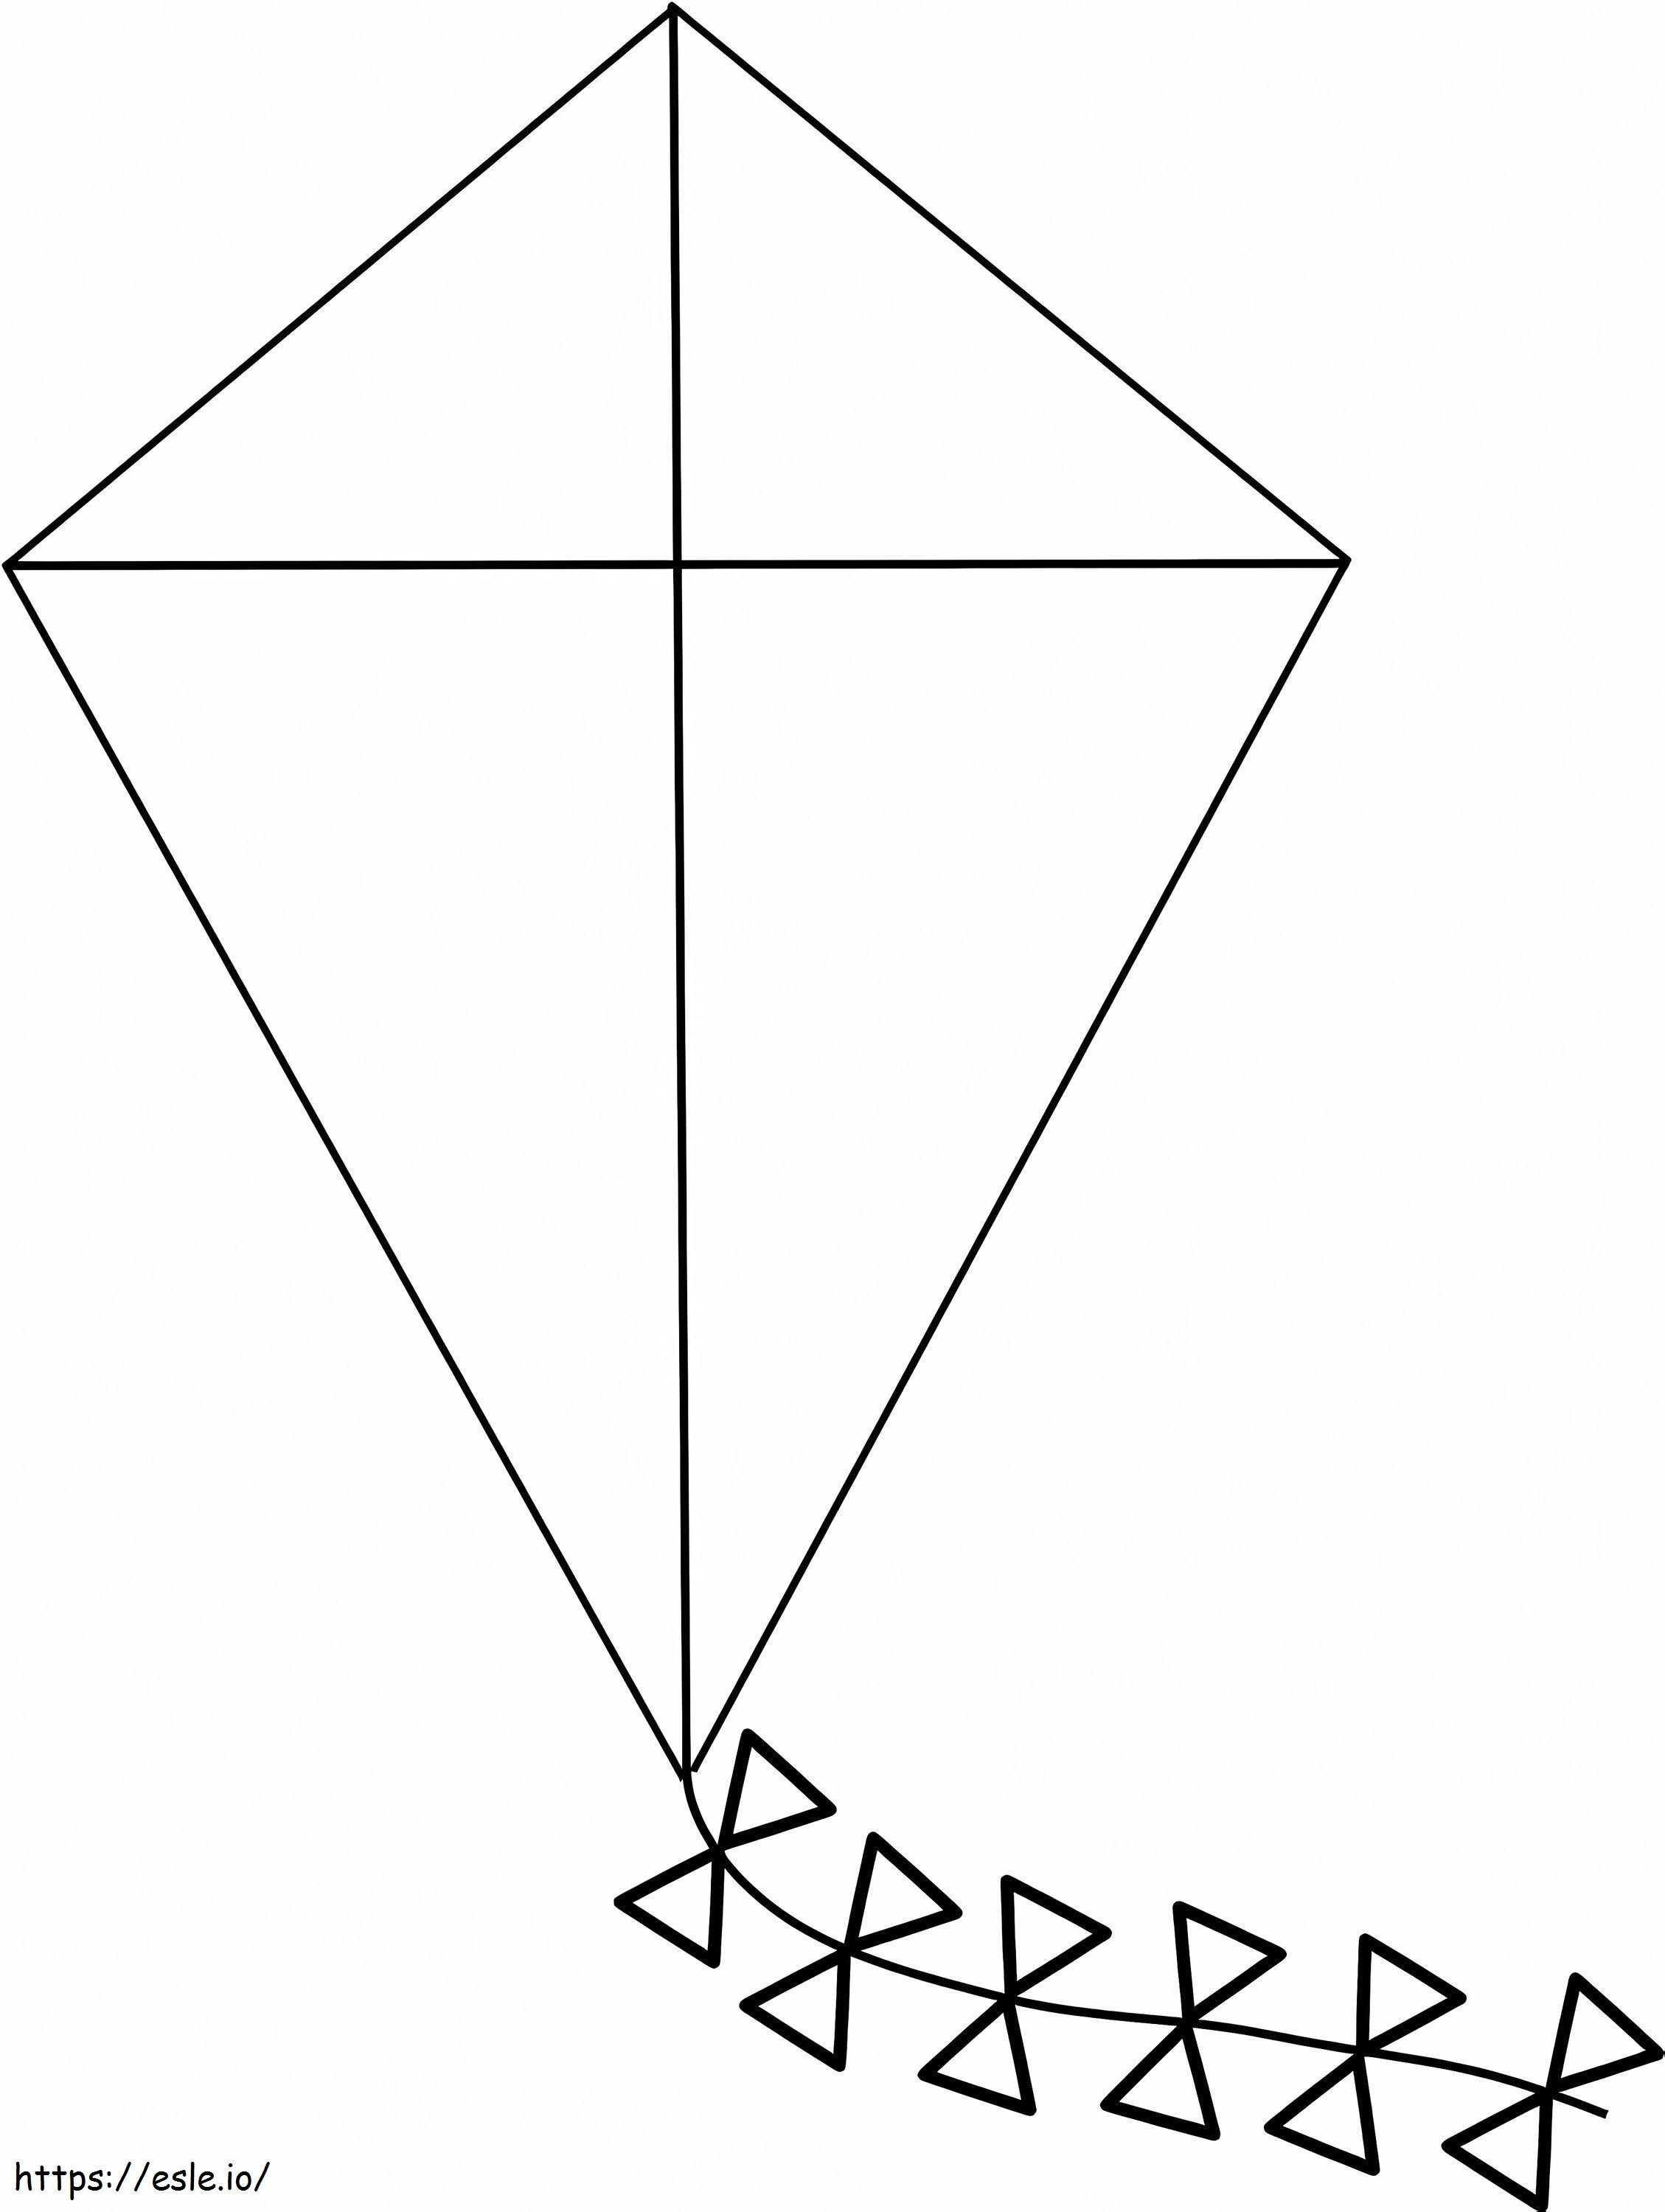 Kite 6 coloring page